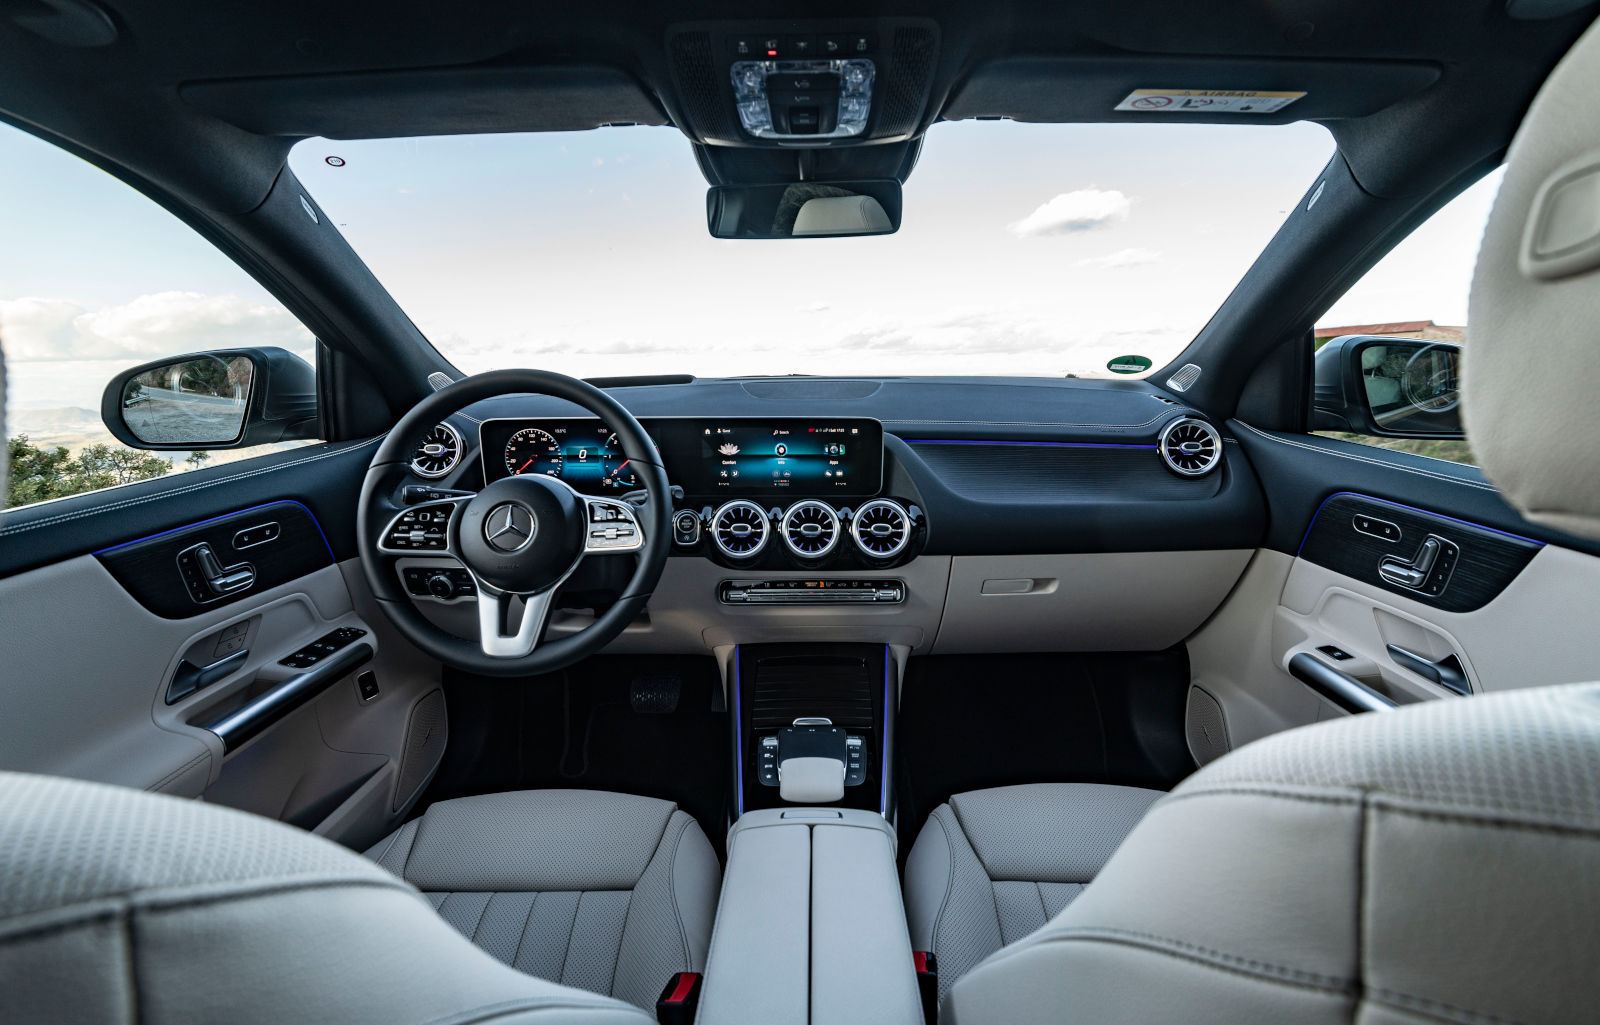 Spacious Interiors in the GLA